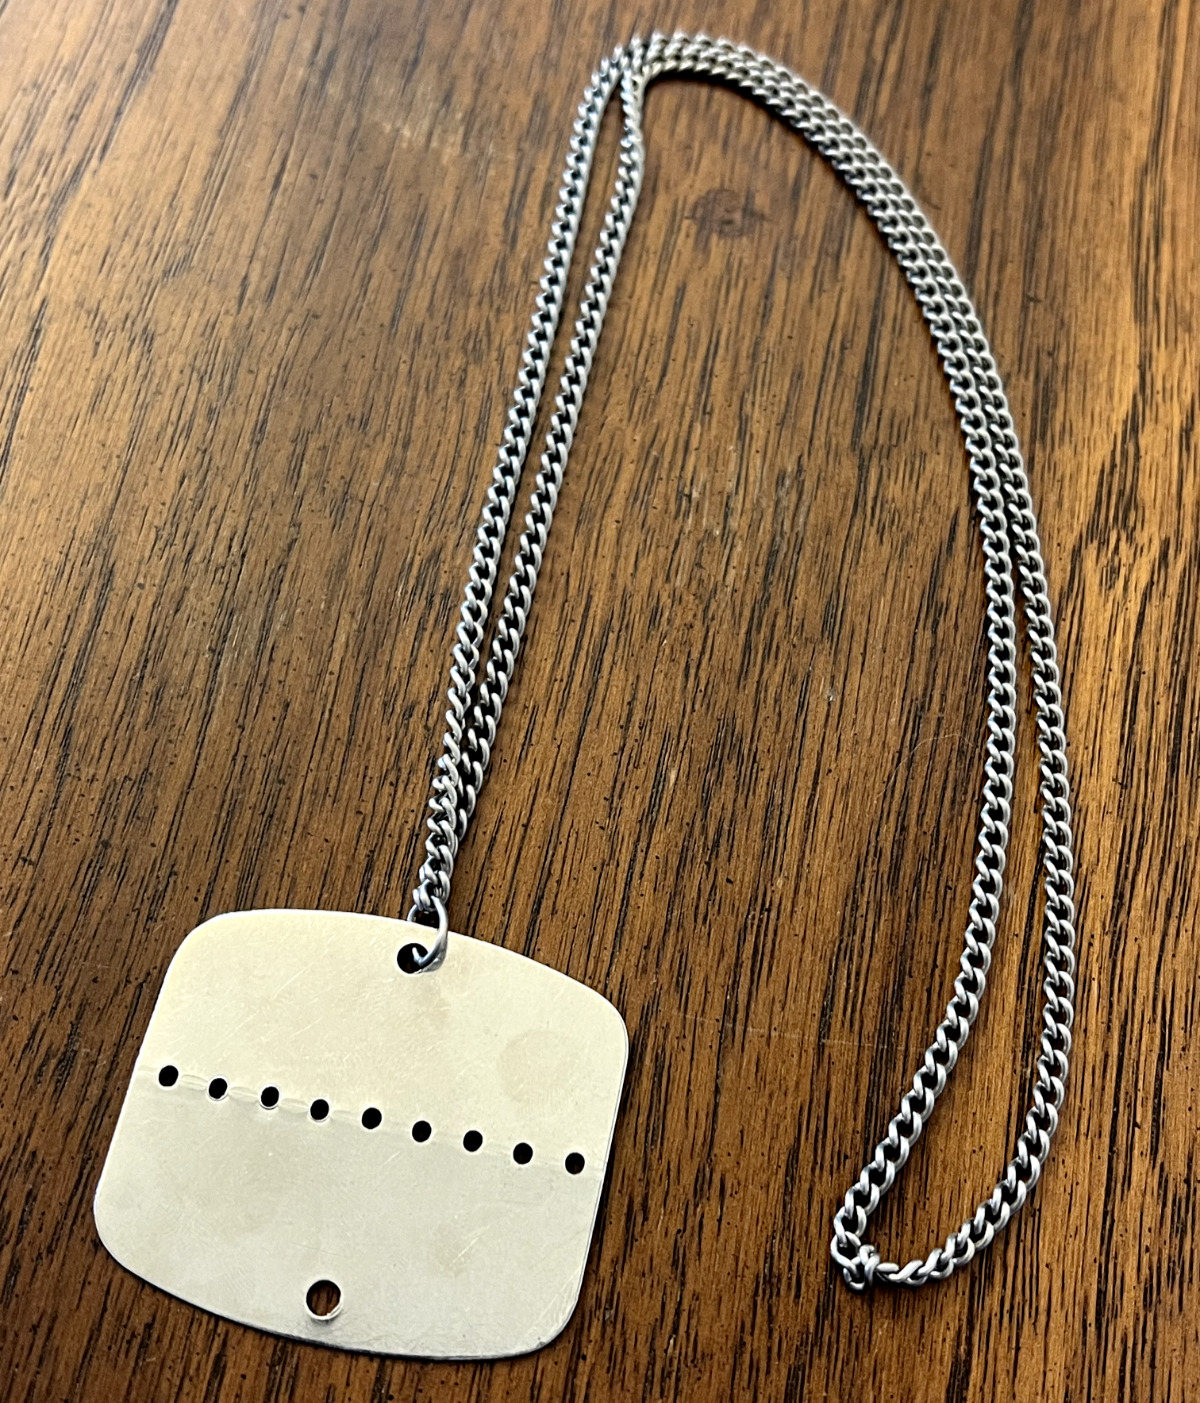 Military Dog Tag French Army Issued Chain Unused VTG 1960's Original Authentic